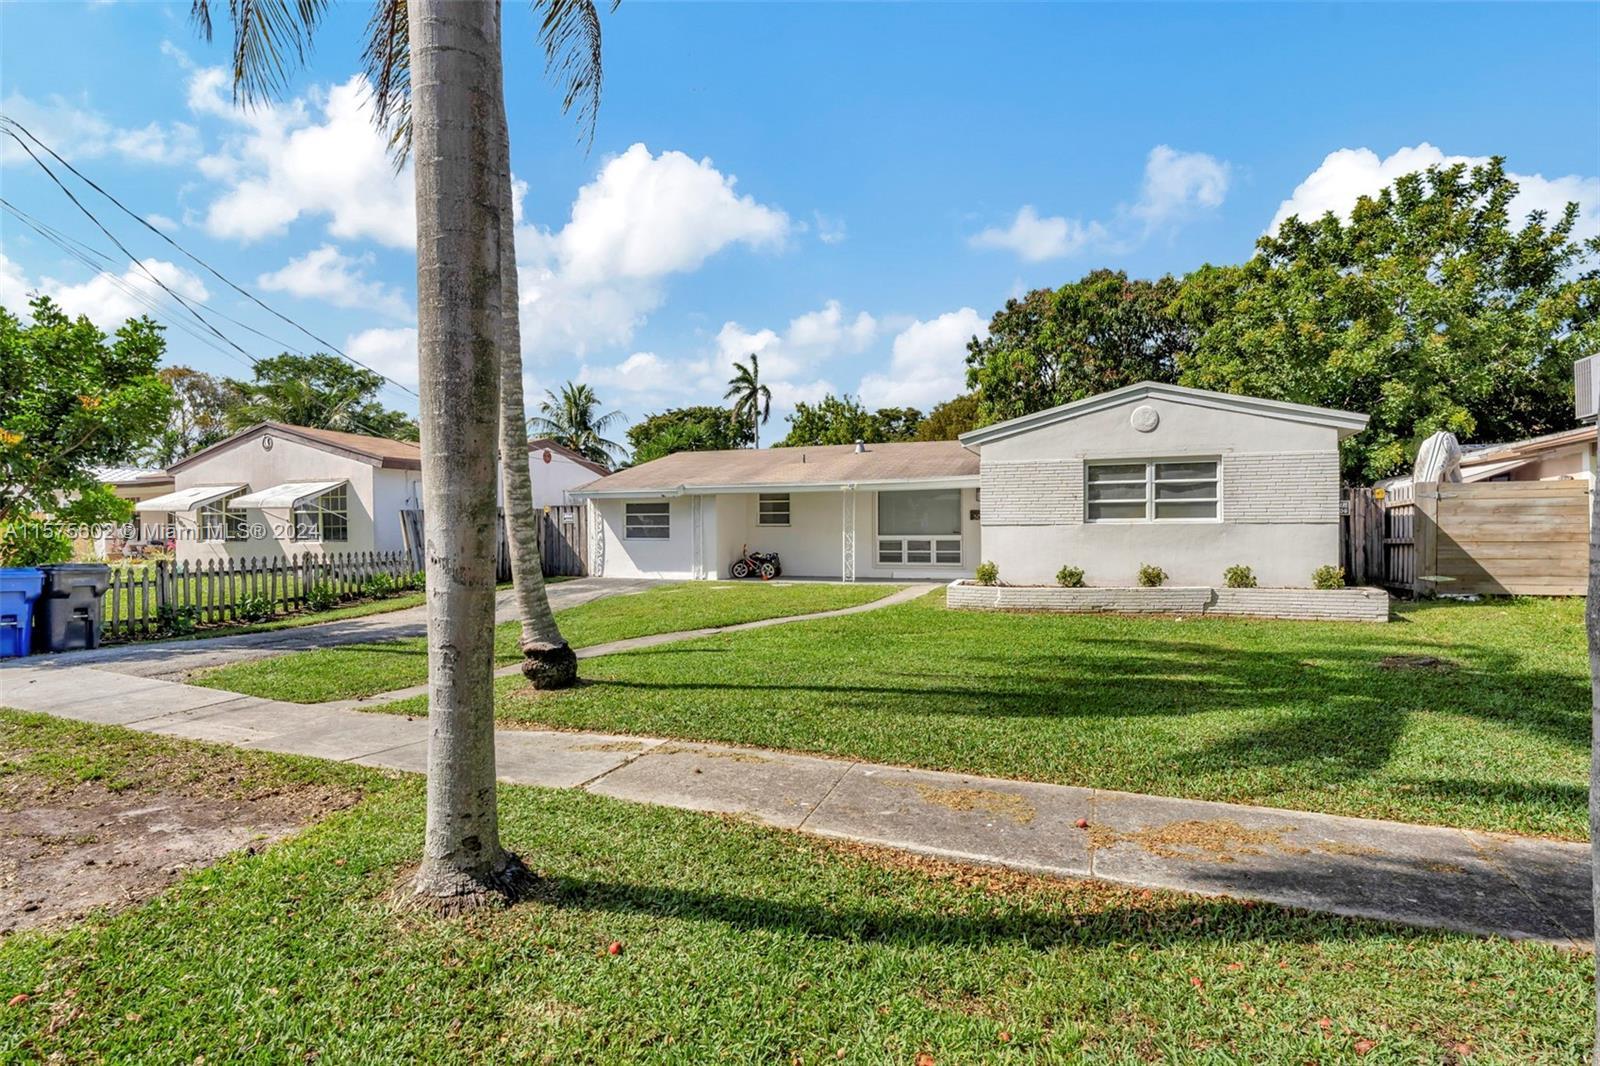 Photo of 3043 Hayes St in Hollywood, FL